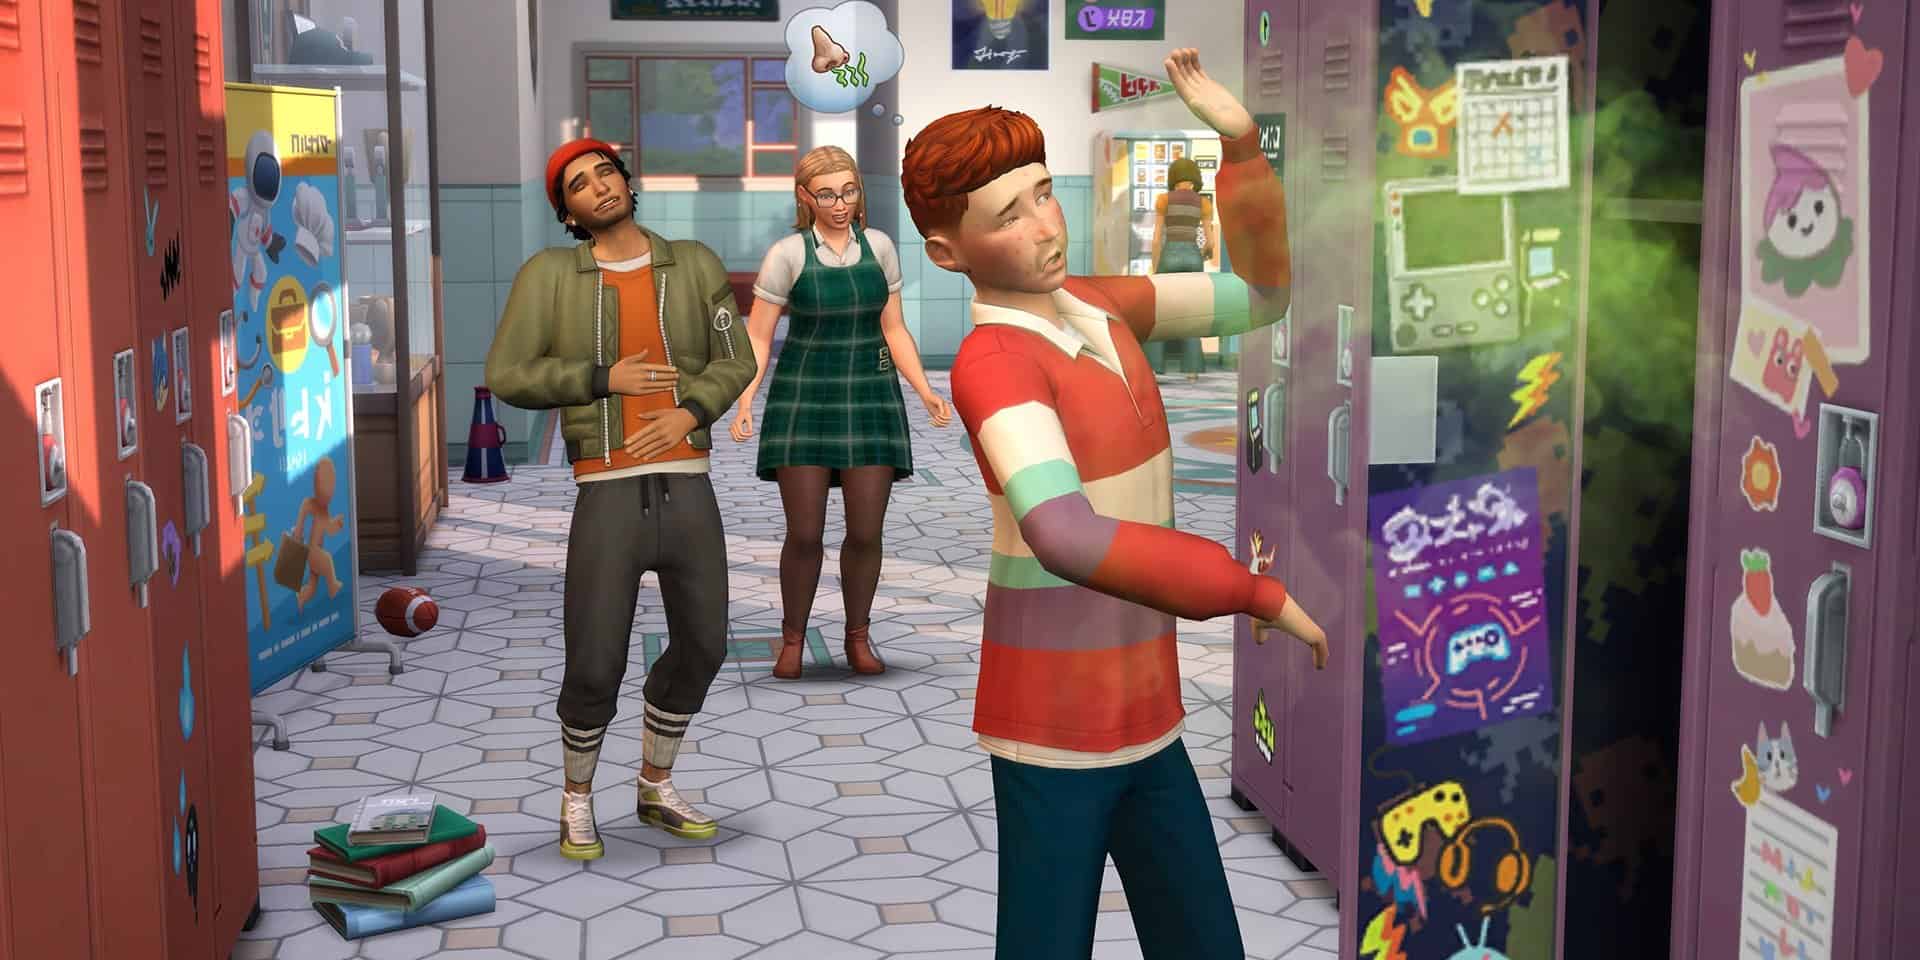 A Sim plays a prank in The Sims 4. 